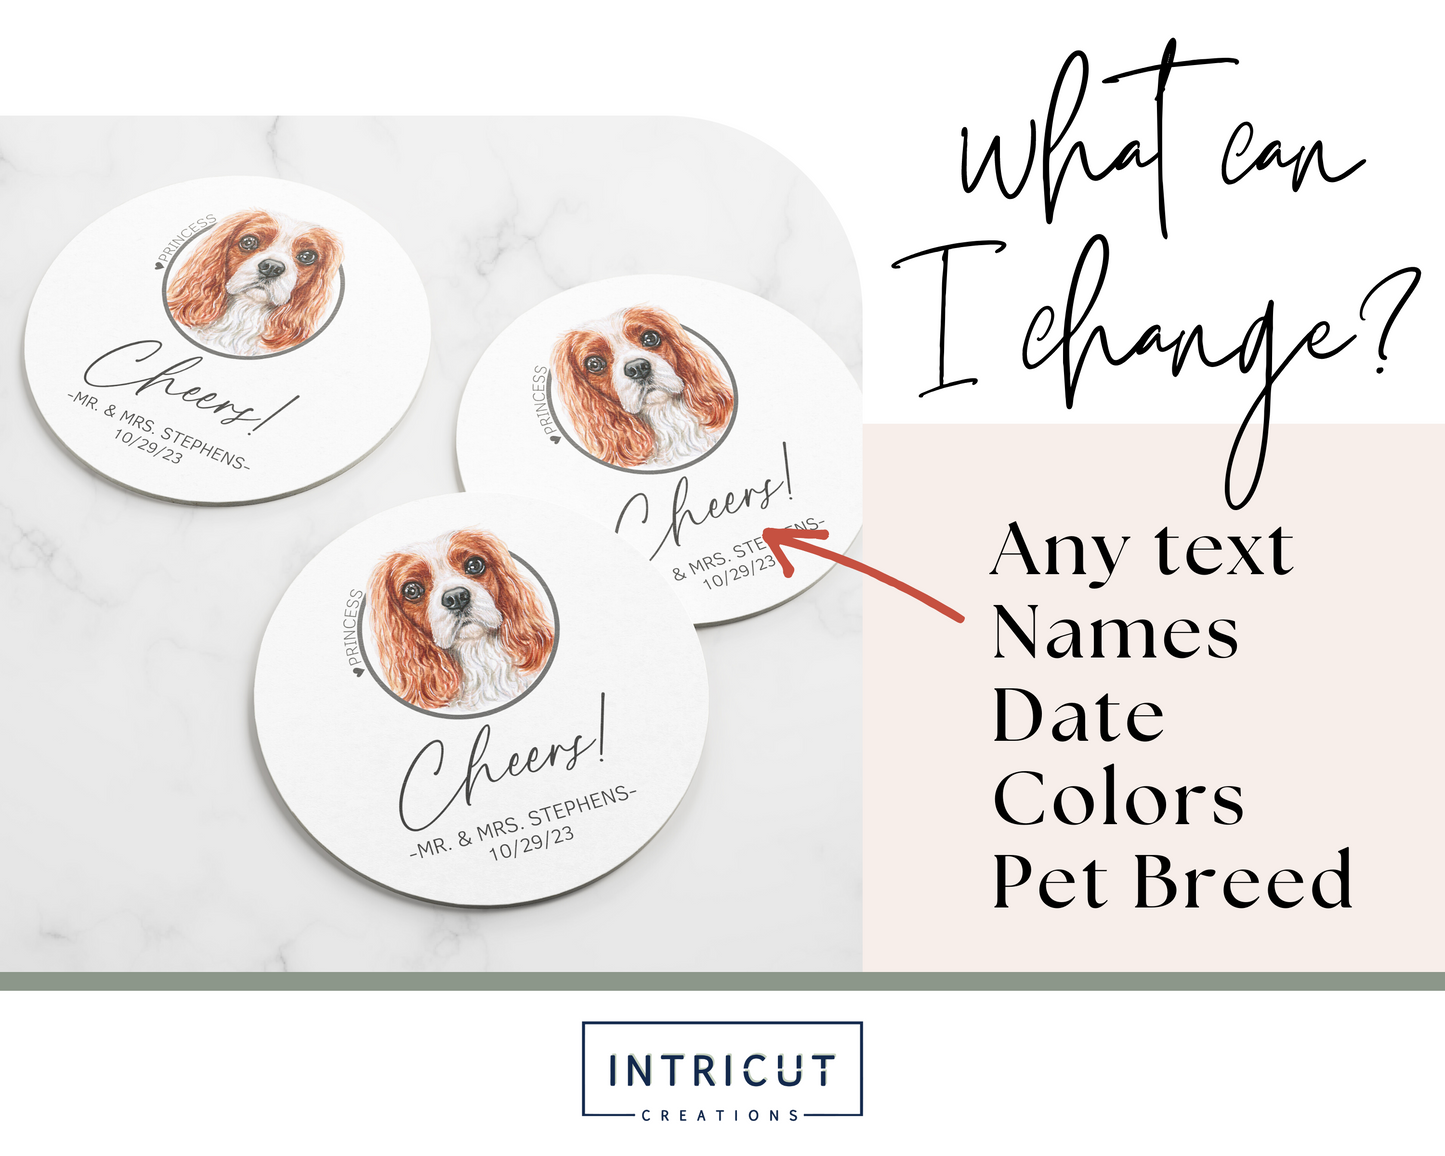 what can I change? any text, names, date, colors of text and ring, and pet breed (pet colors cannot be changed)